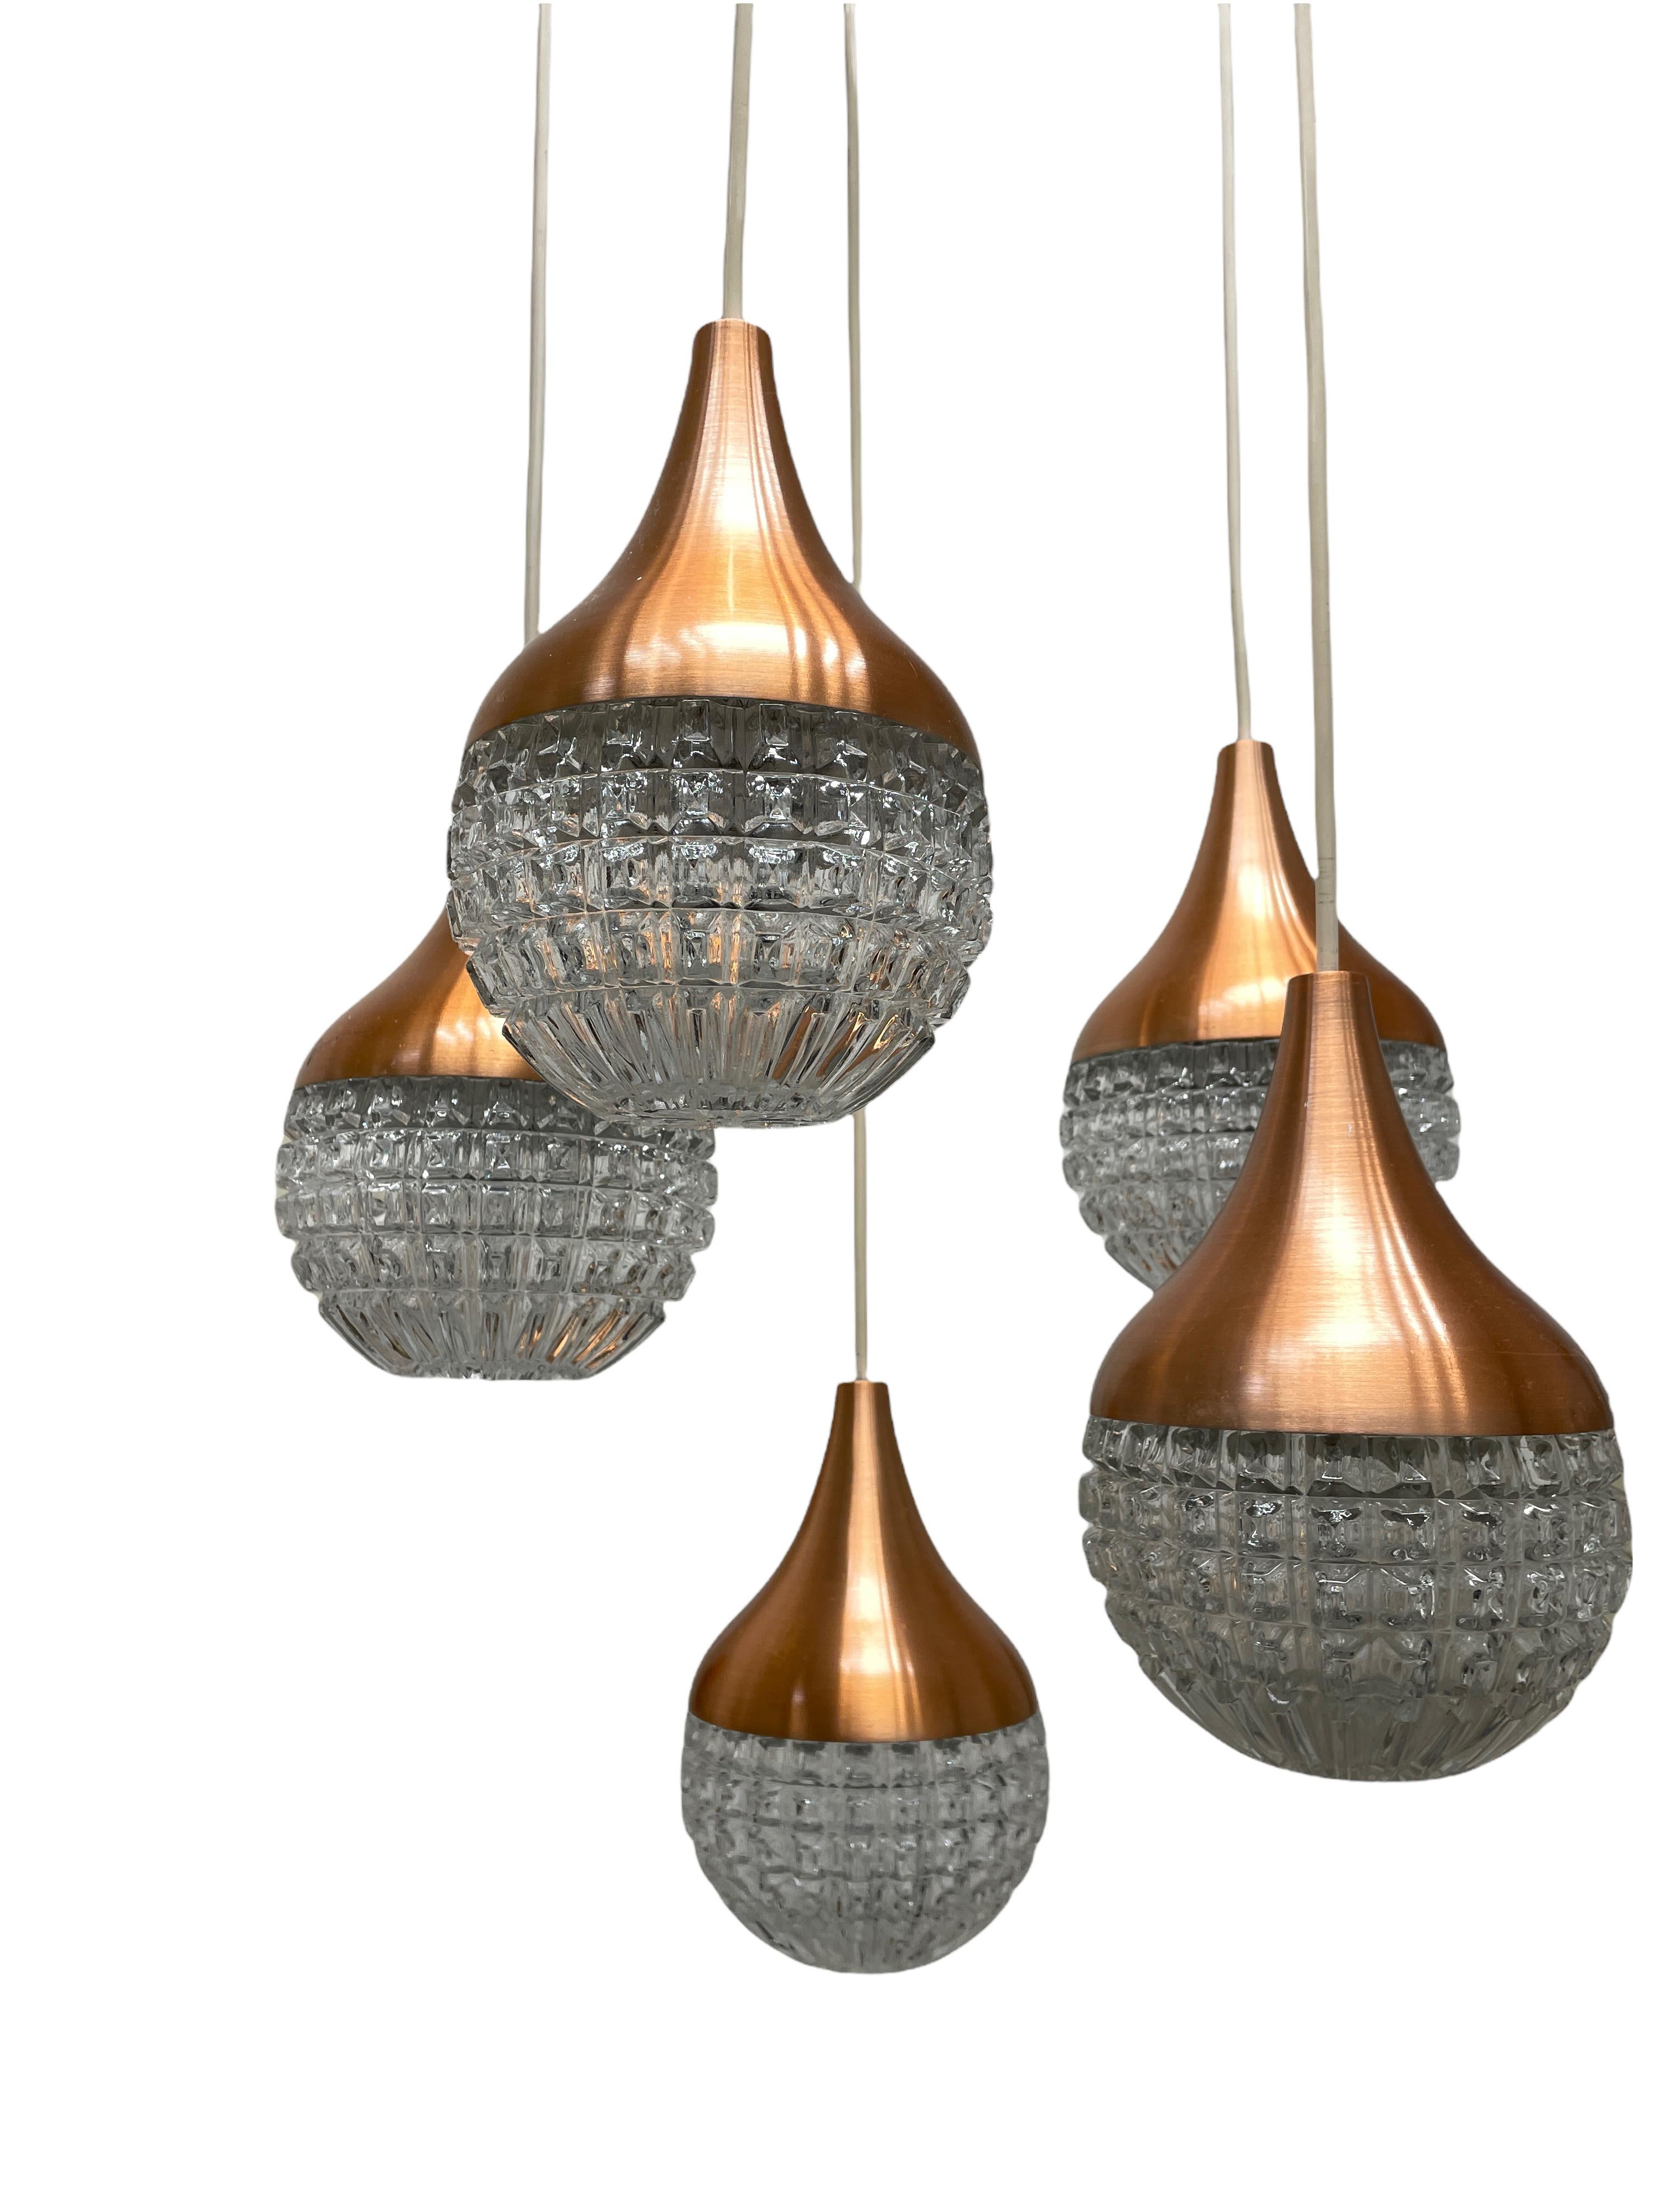 Mid-20th Century Vintage Pendant Lamp Cascading Glass Balls Chandelier, Germany, 1960s For Sale